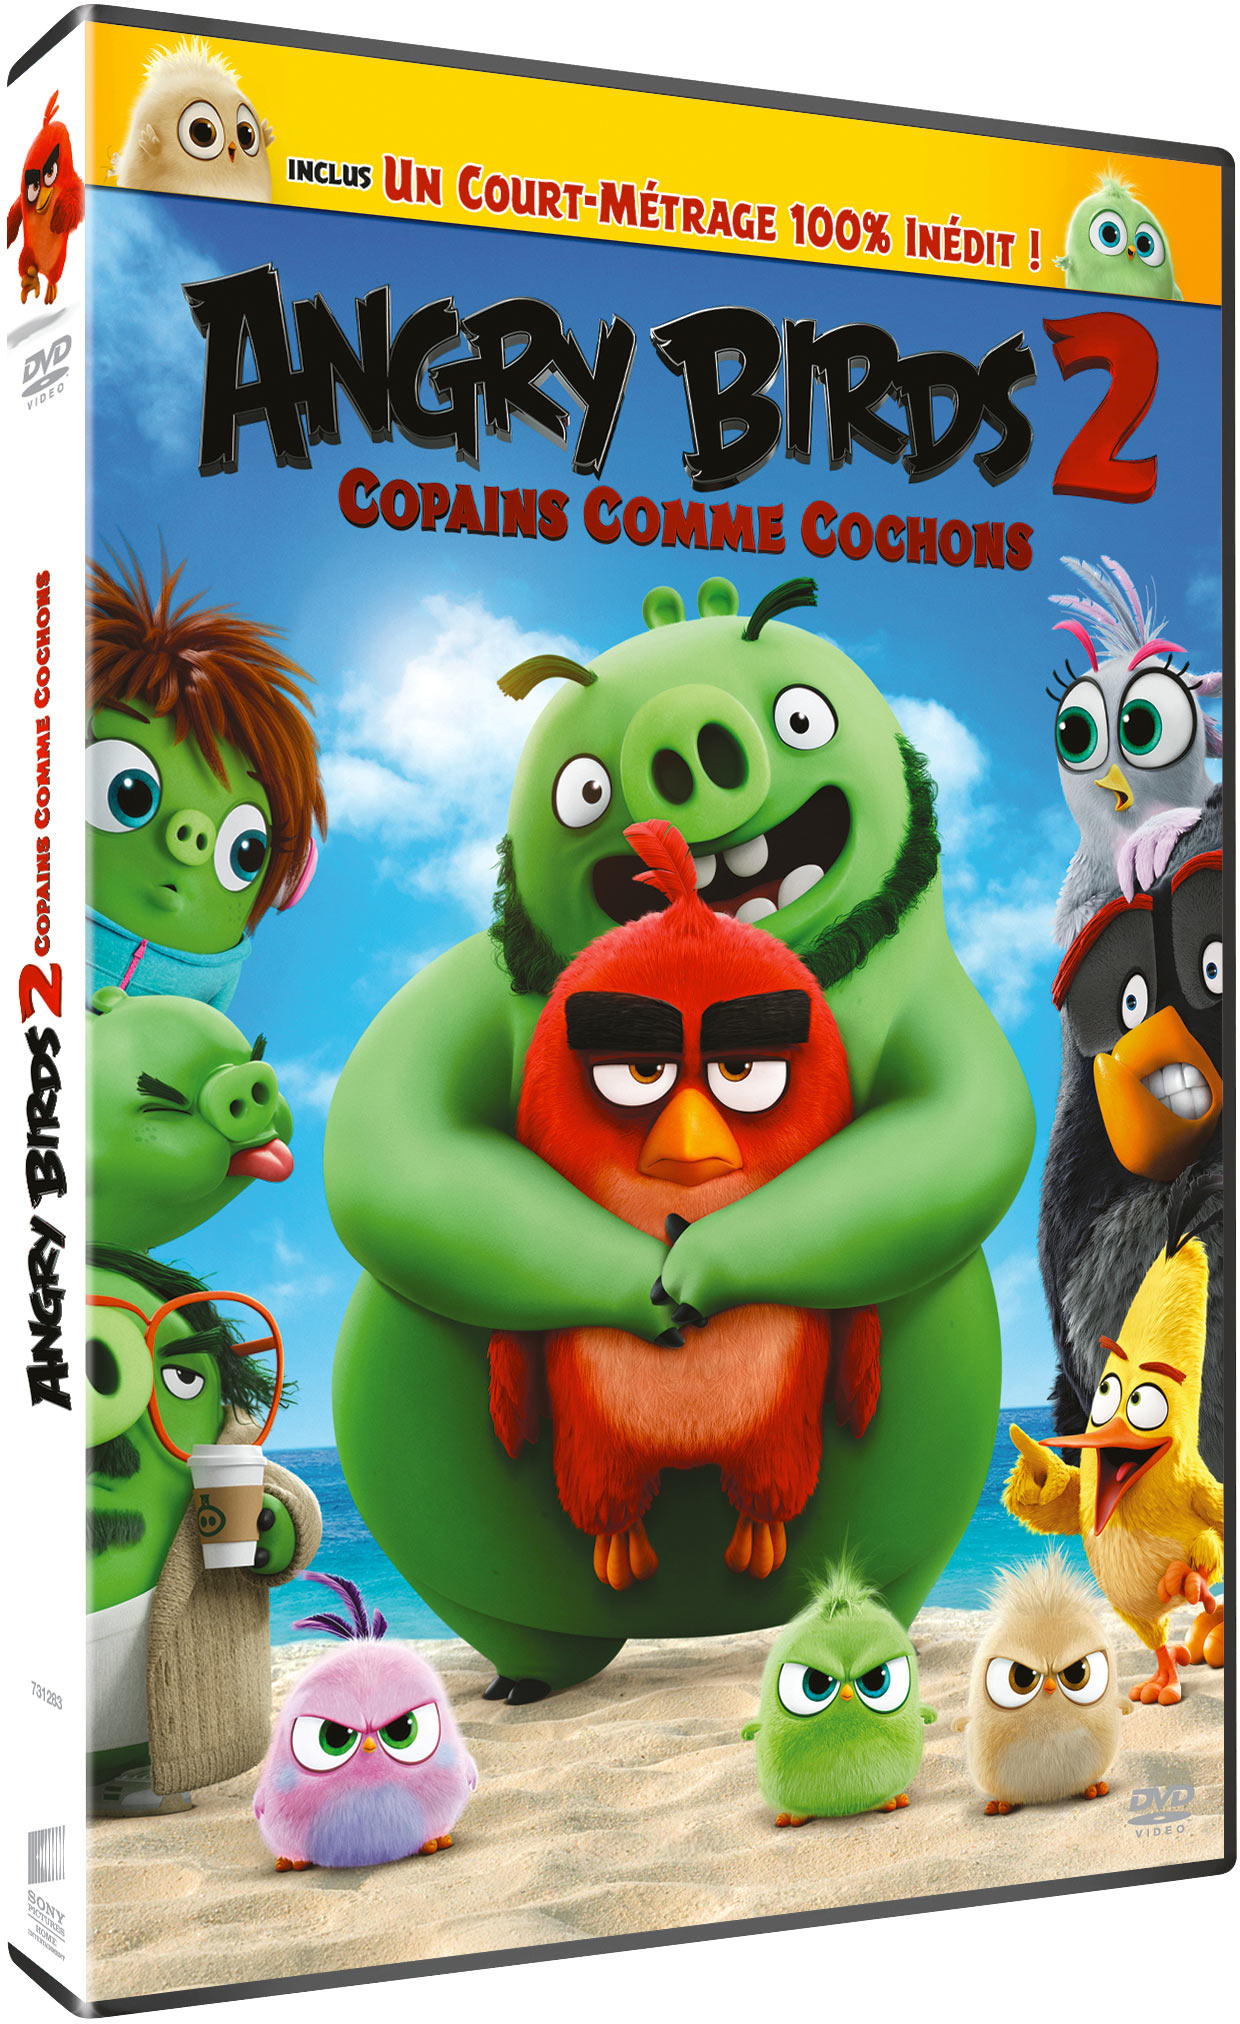 ANGRY BIRDS 2 : COPAINS COMME COCHONS - DVD